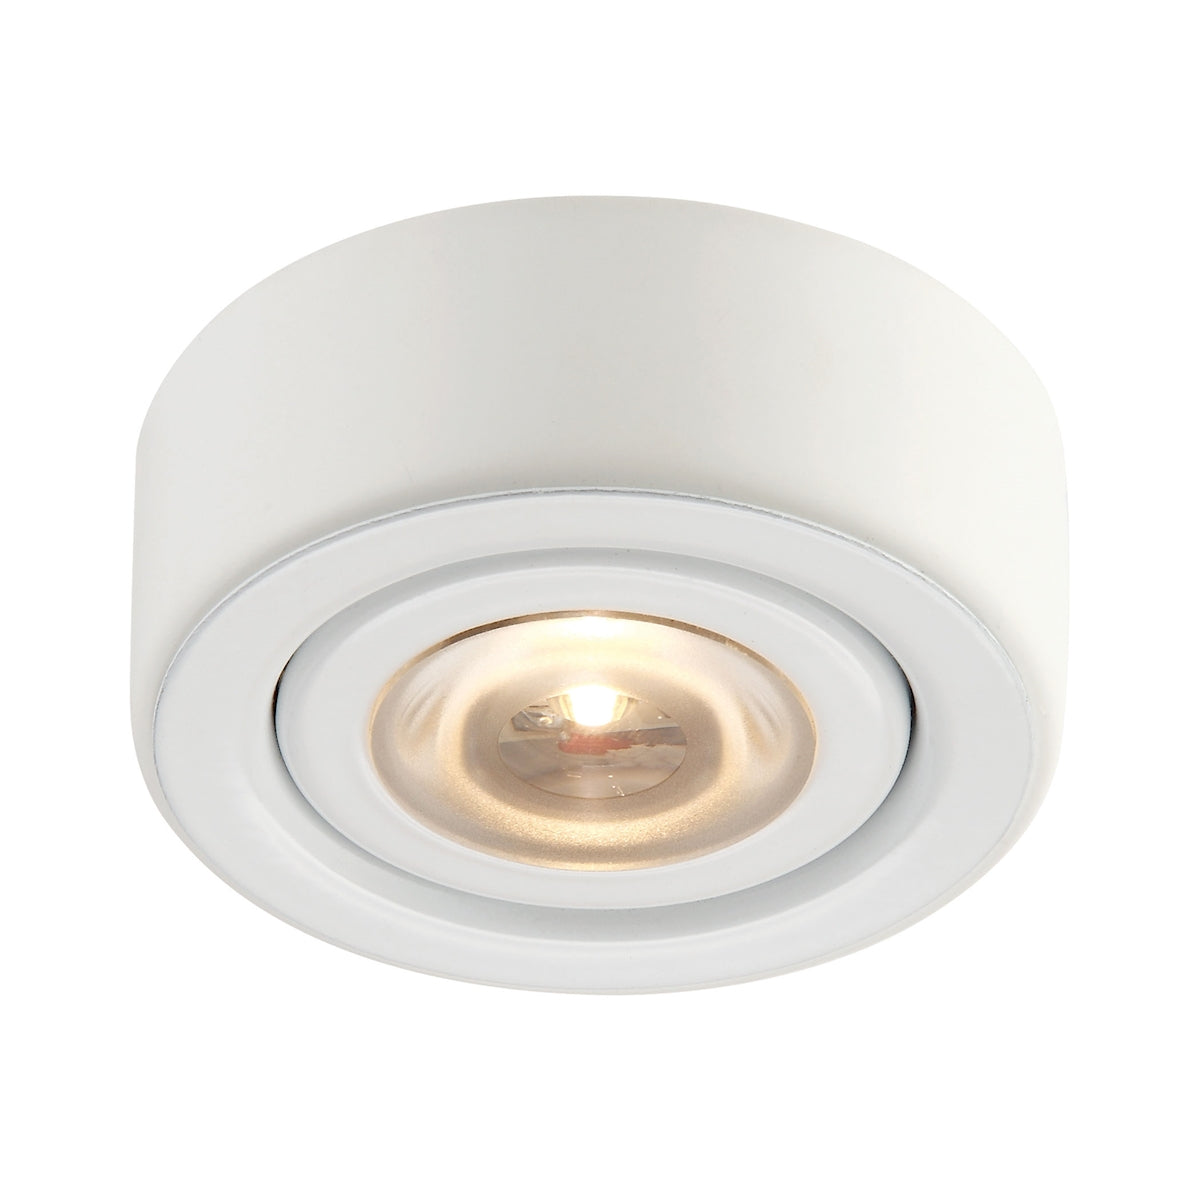 ELK Lighting MLE-101-30 Eco 1-Light Puck Light in White with Clear Glass Diffuser - Integrated LED